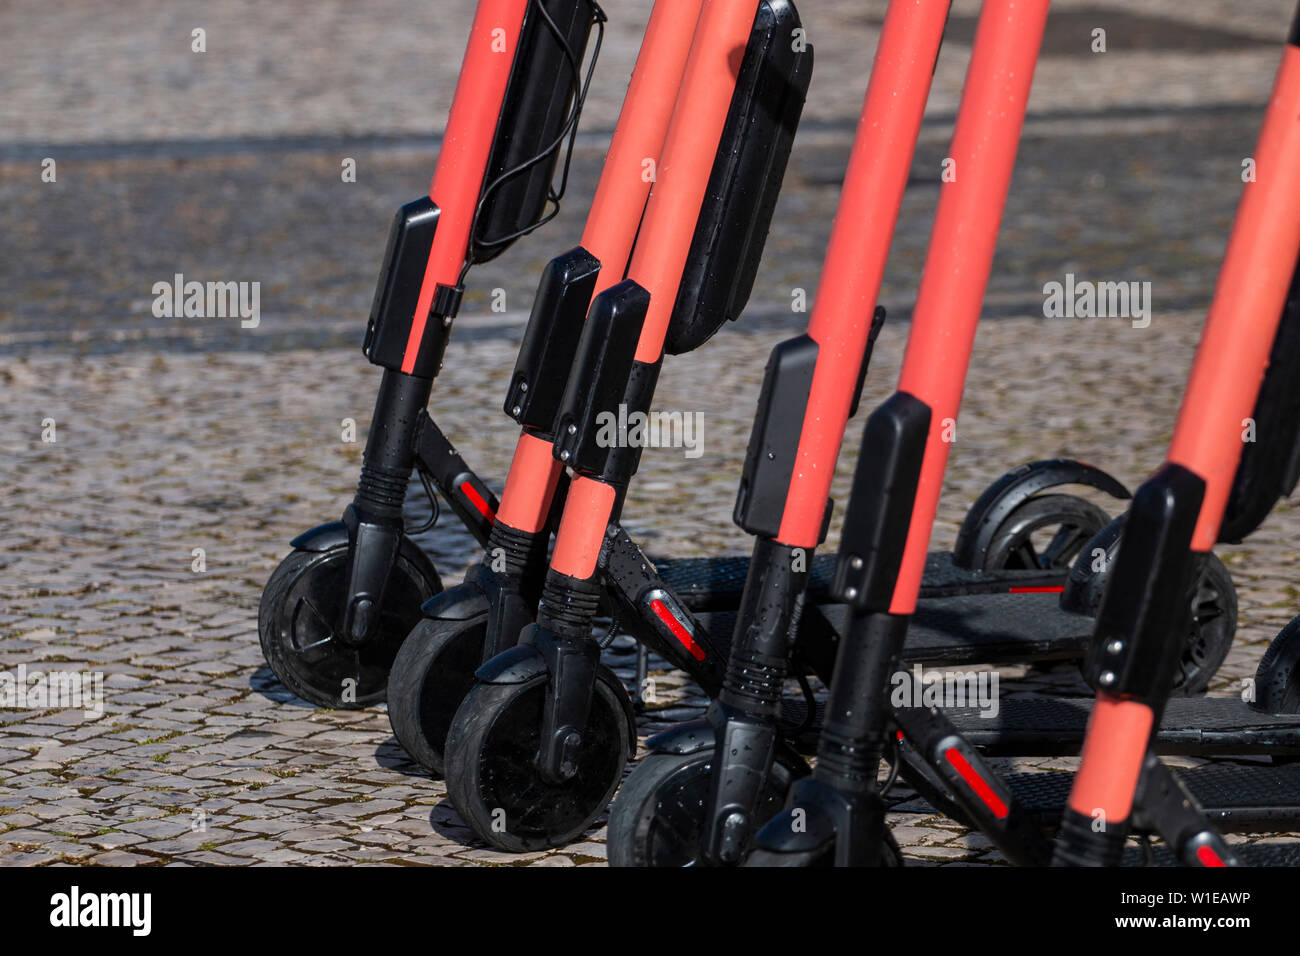 Electric Scooters In Row On The Streets A Modern City Bike Rental